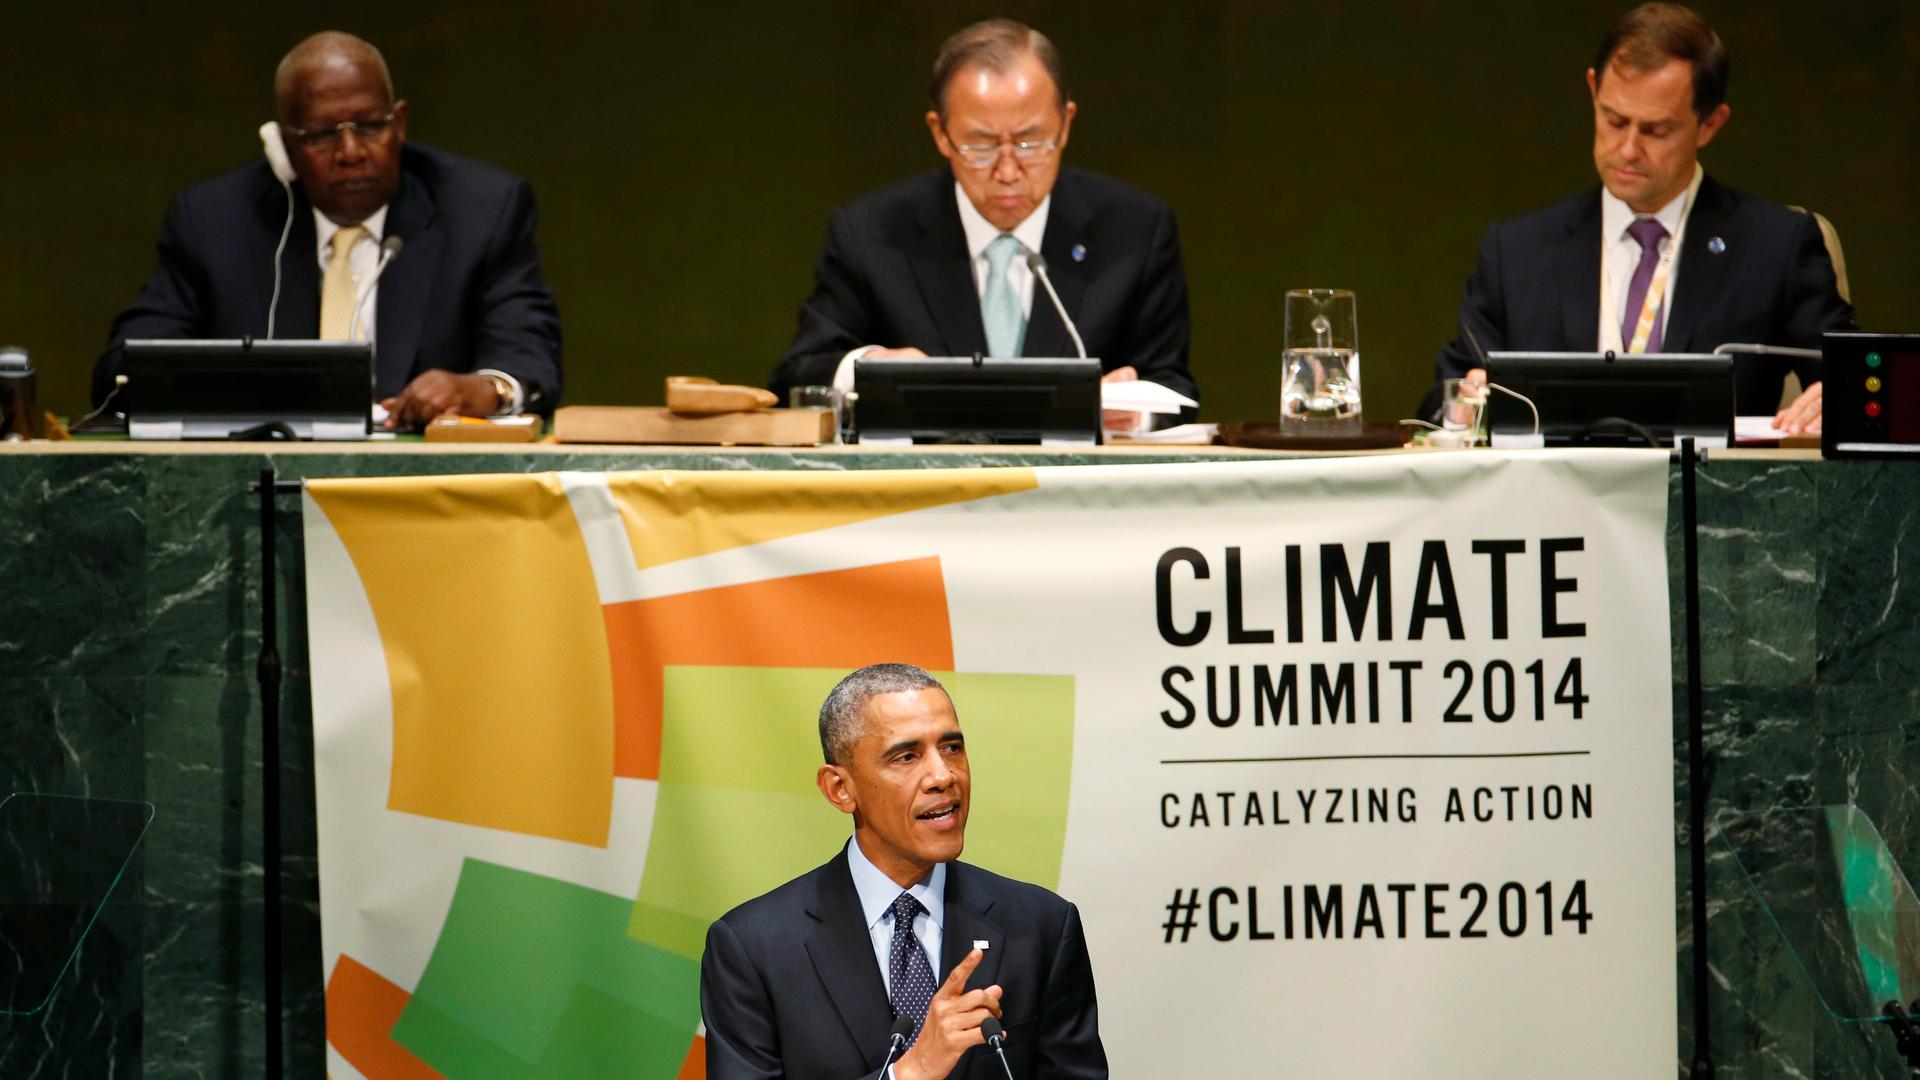 President Barack Obama addresses the Climate Summit at UN headquarters in New York on September 23, 2014. Obama touted American commitments to cut greenhouse pollution, but international agreements have been undercut by sharp internal divisions in the US